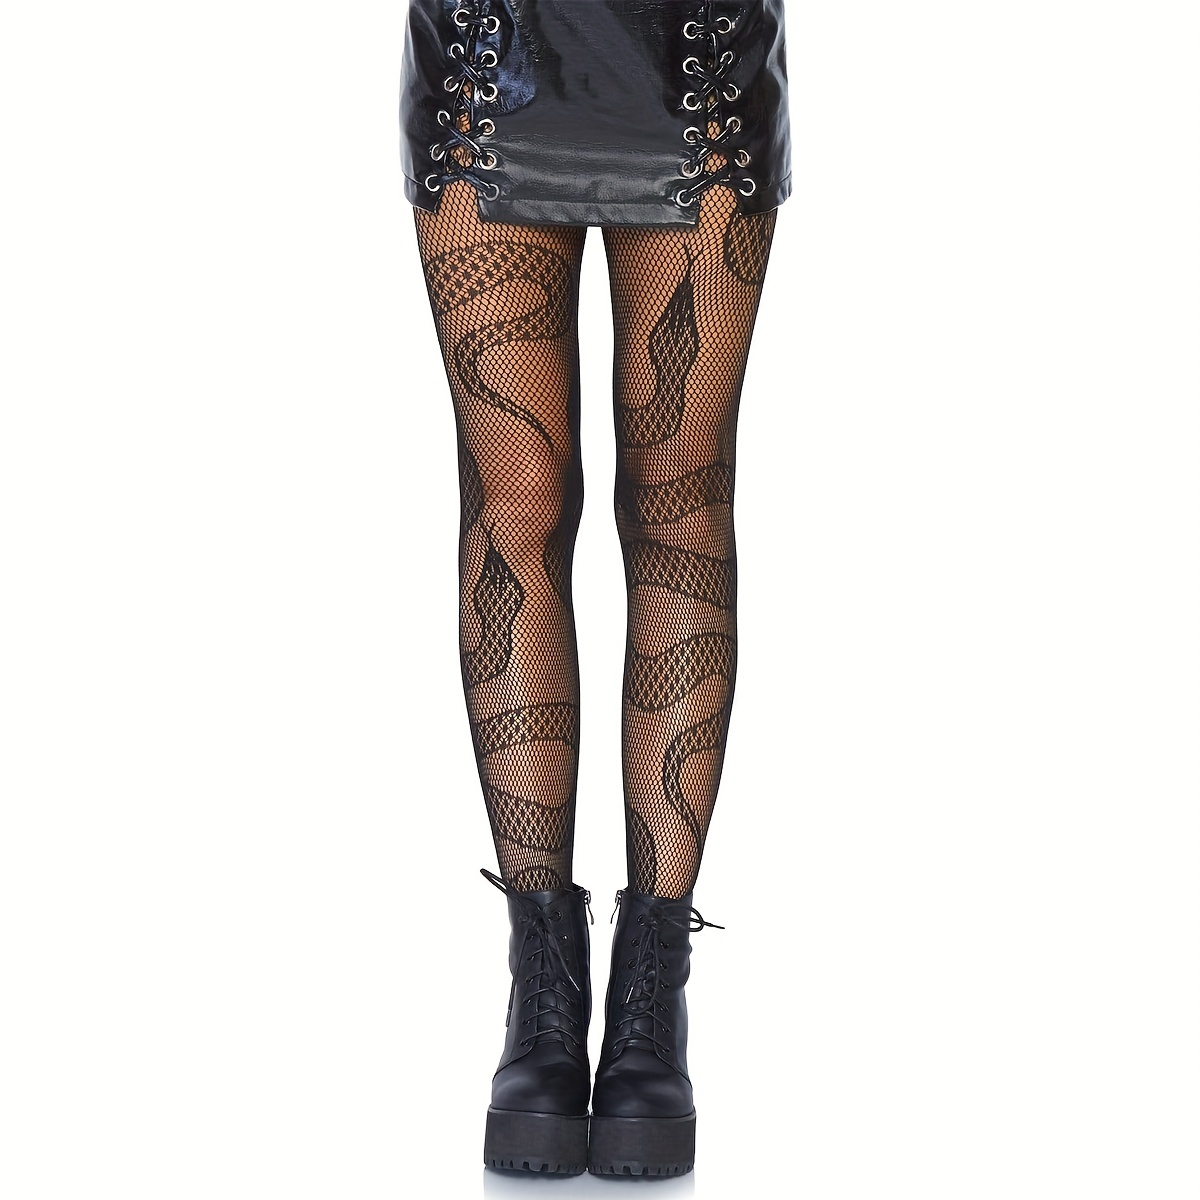 Striped Tights Goth Tights Tattered & Torn Tights Fishnet Tights Halloween  Tights Fishnet Stockings Gothic Tights Mesh Tights -  Canada